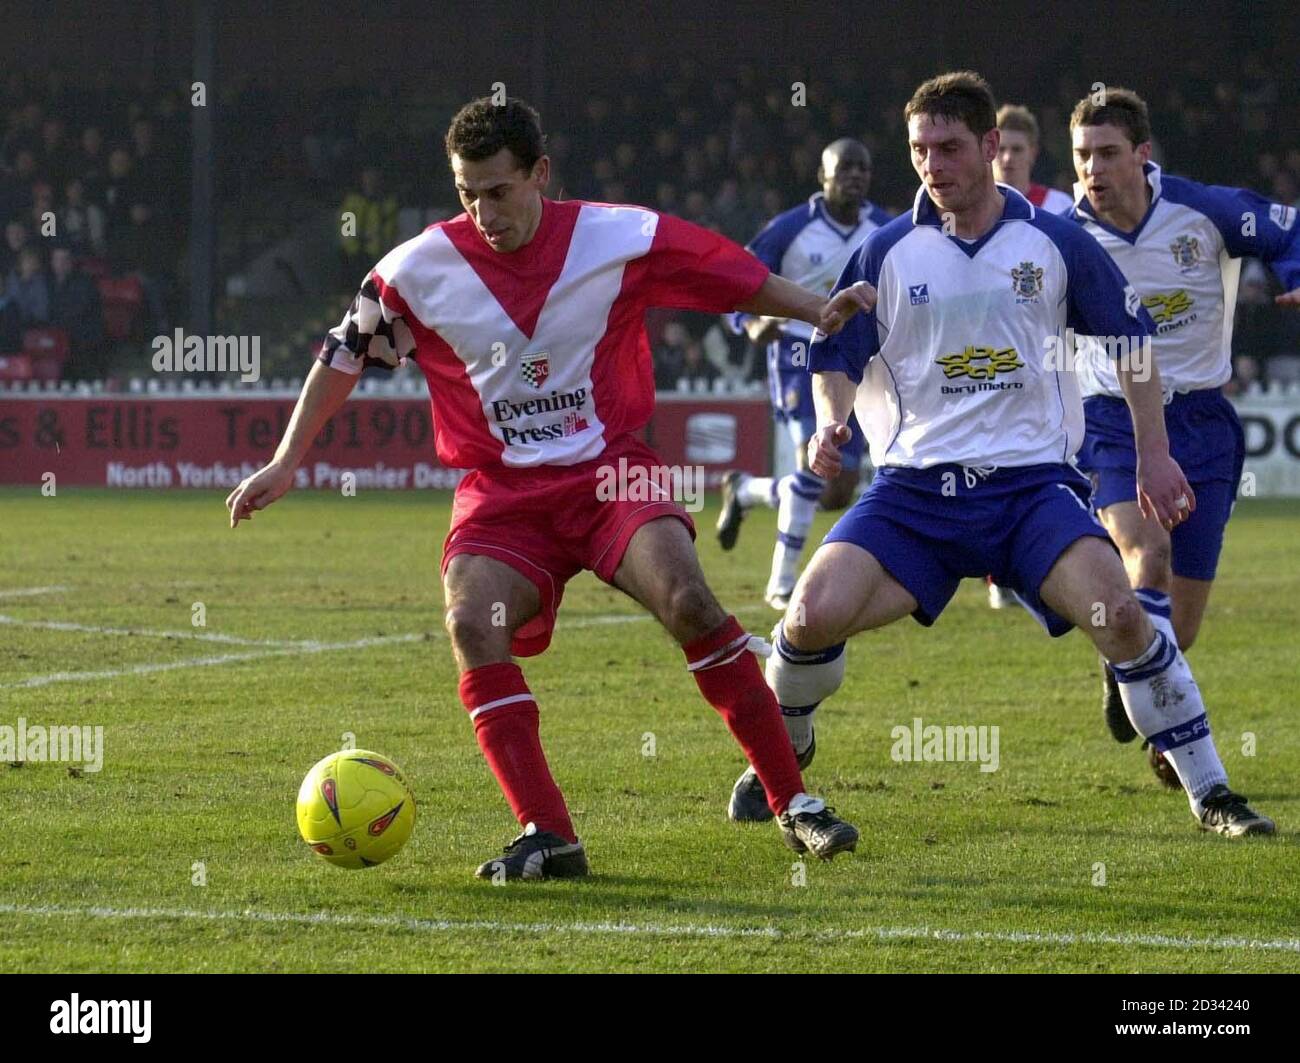 York's Lee Nogan (left) screens the ball from Bury's Steve Redmond, during their Nationwide Division Three match at York's Bootham Crescent ground. THIS PICTURE CAN ONLY BE USED WITHIN THE CONTEXT OF AN EDITORIAL FEATURE. NO UNOFFICIAL CLUB WEBSITE USE. Stock Photo